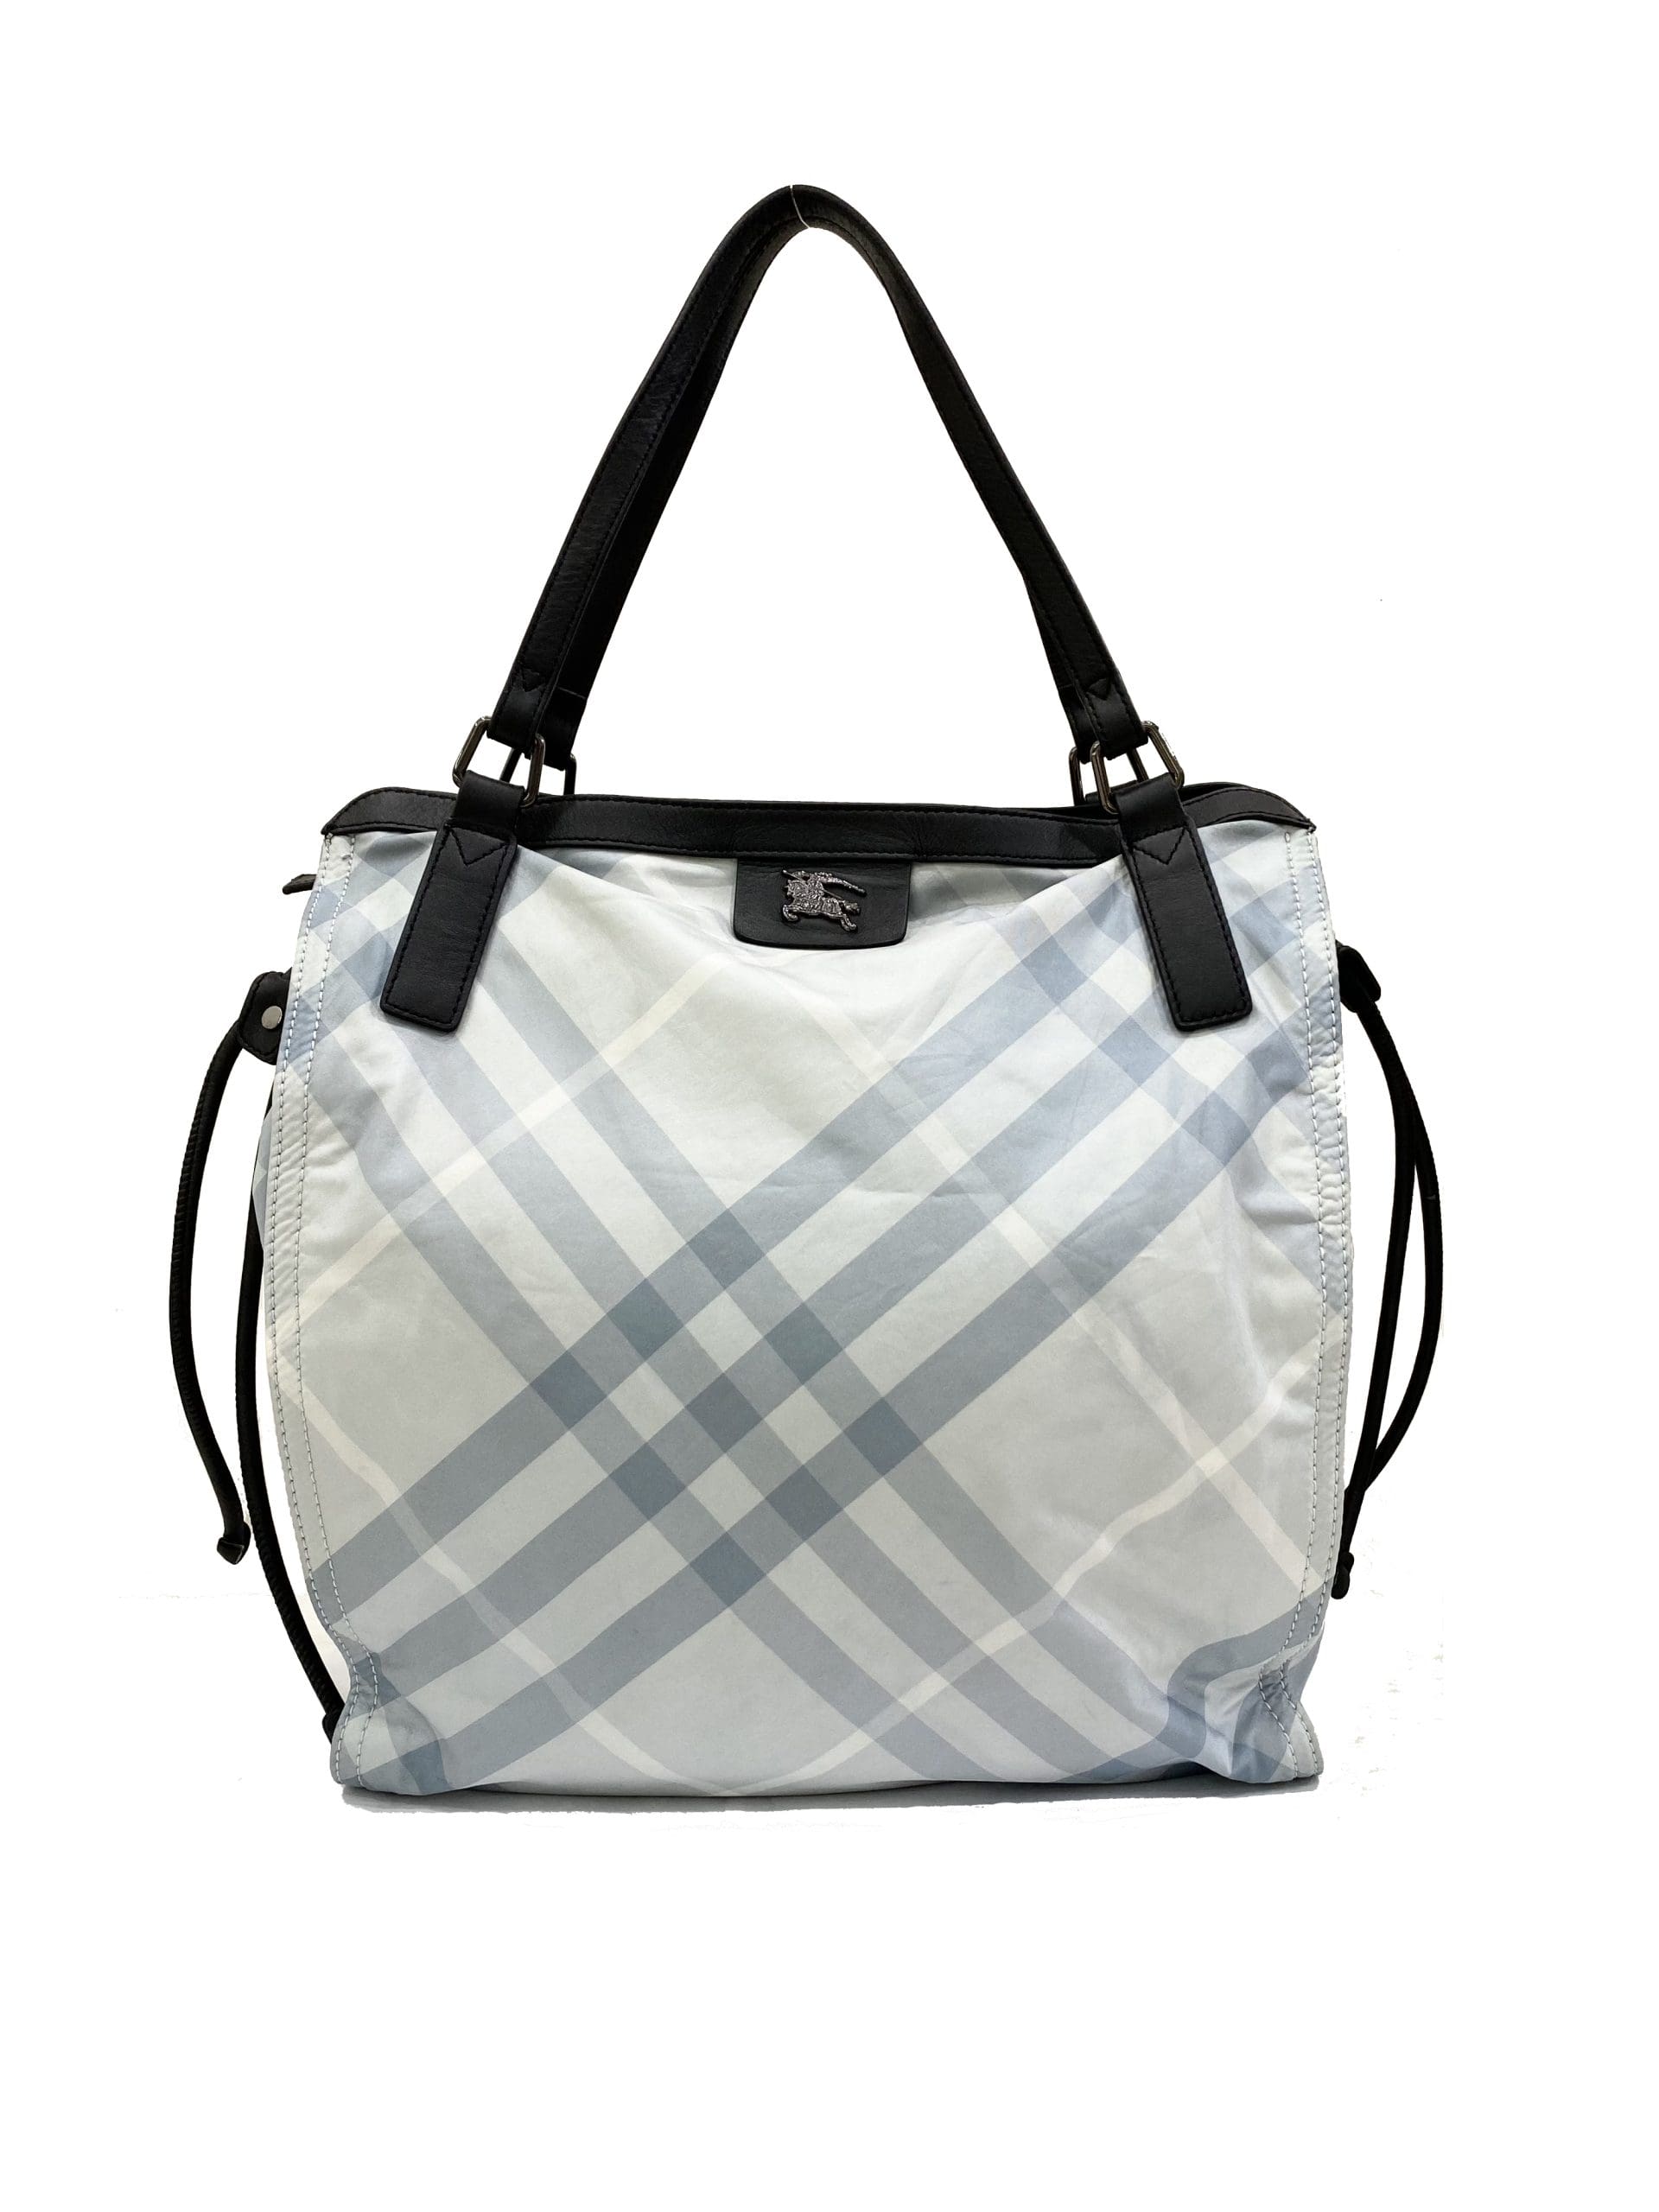 BURBERRY Vintage Packable Nylon Grey Check Tote Bag - Reetzy